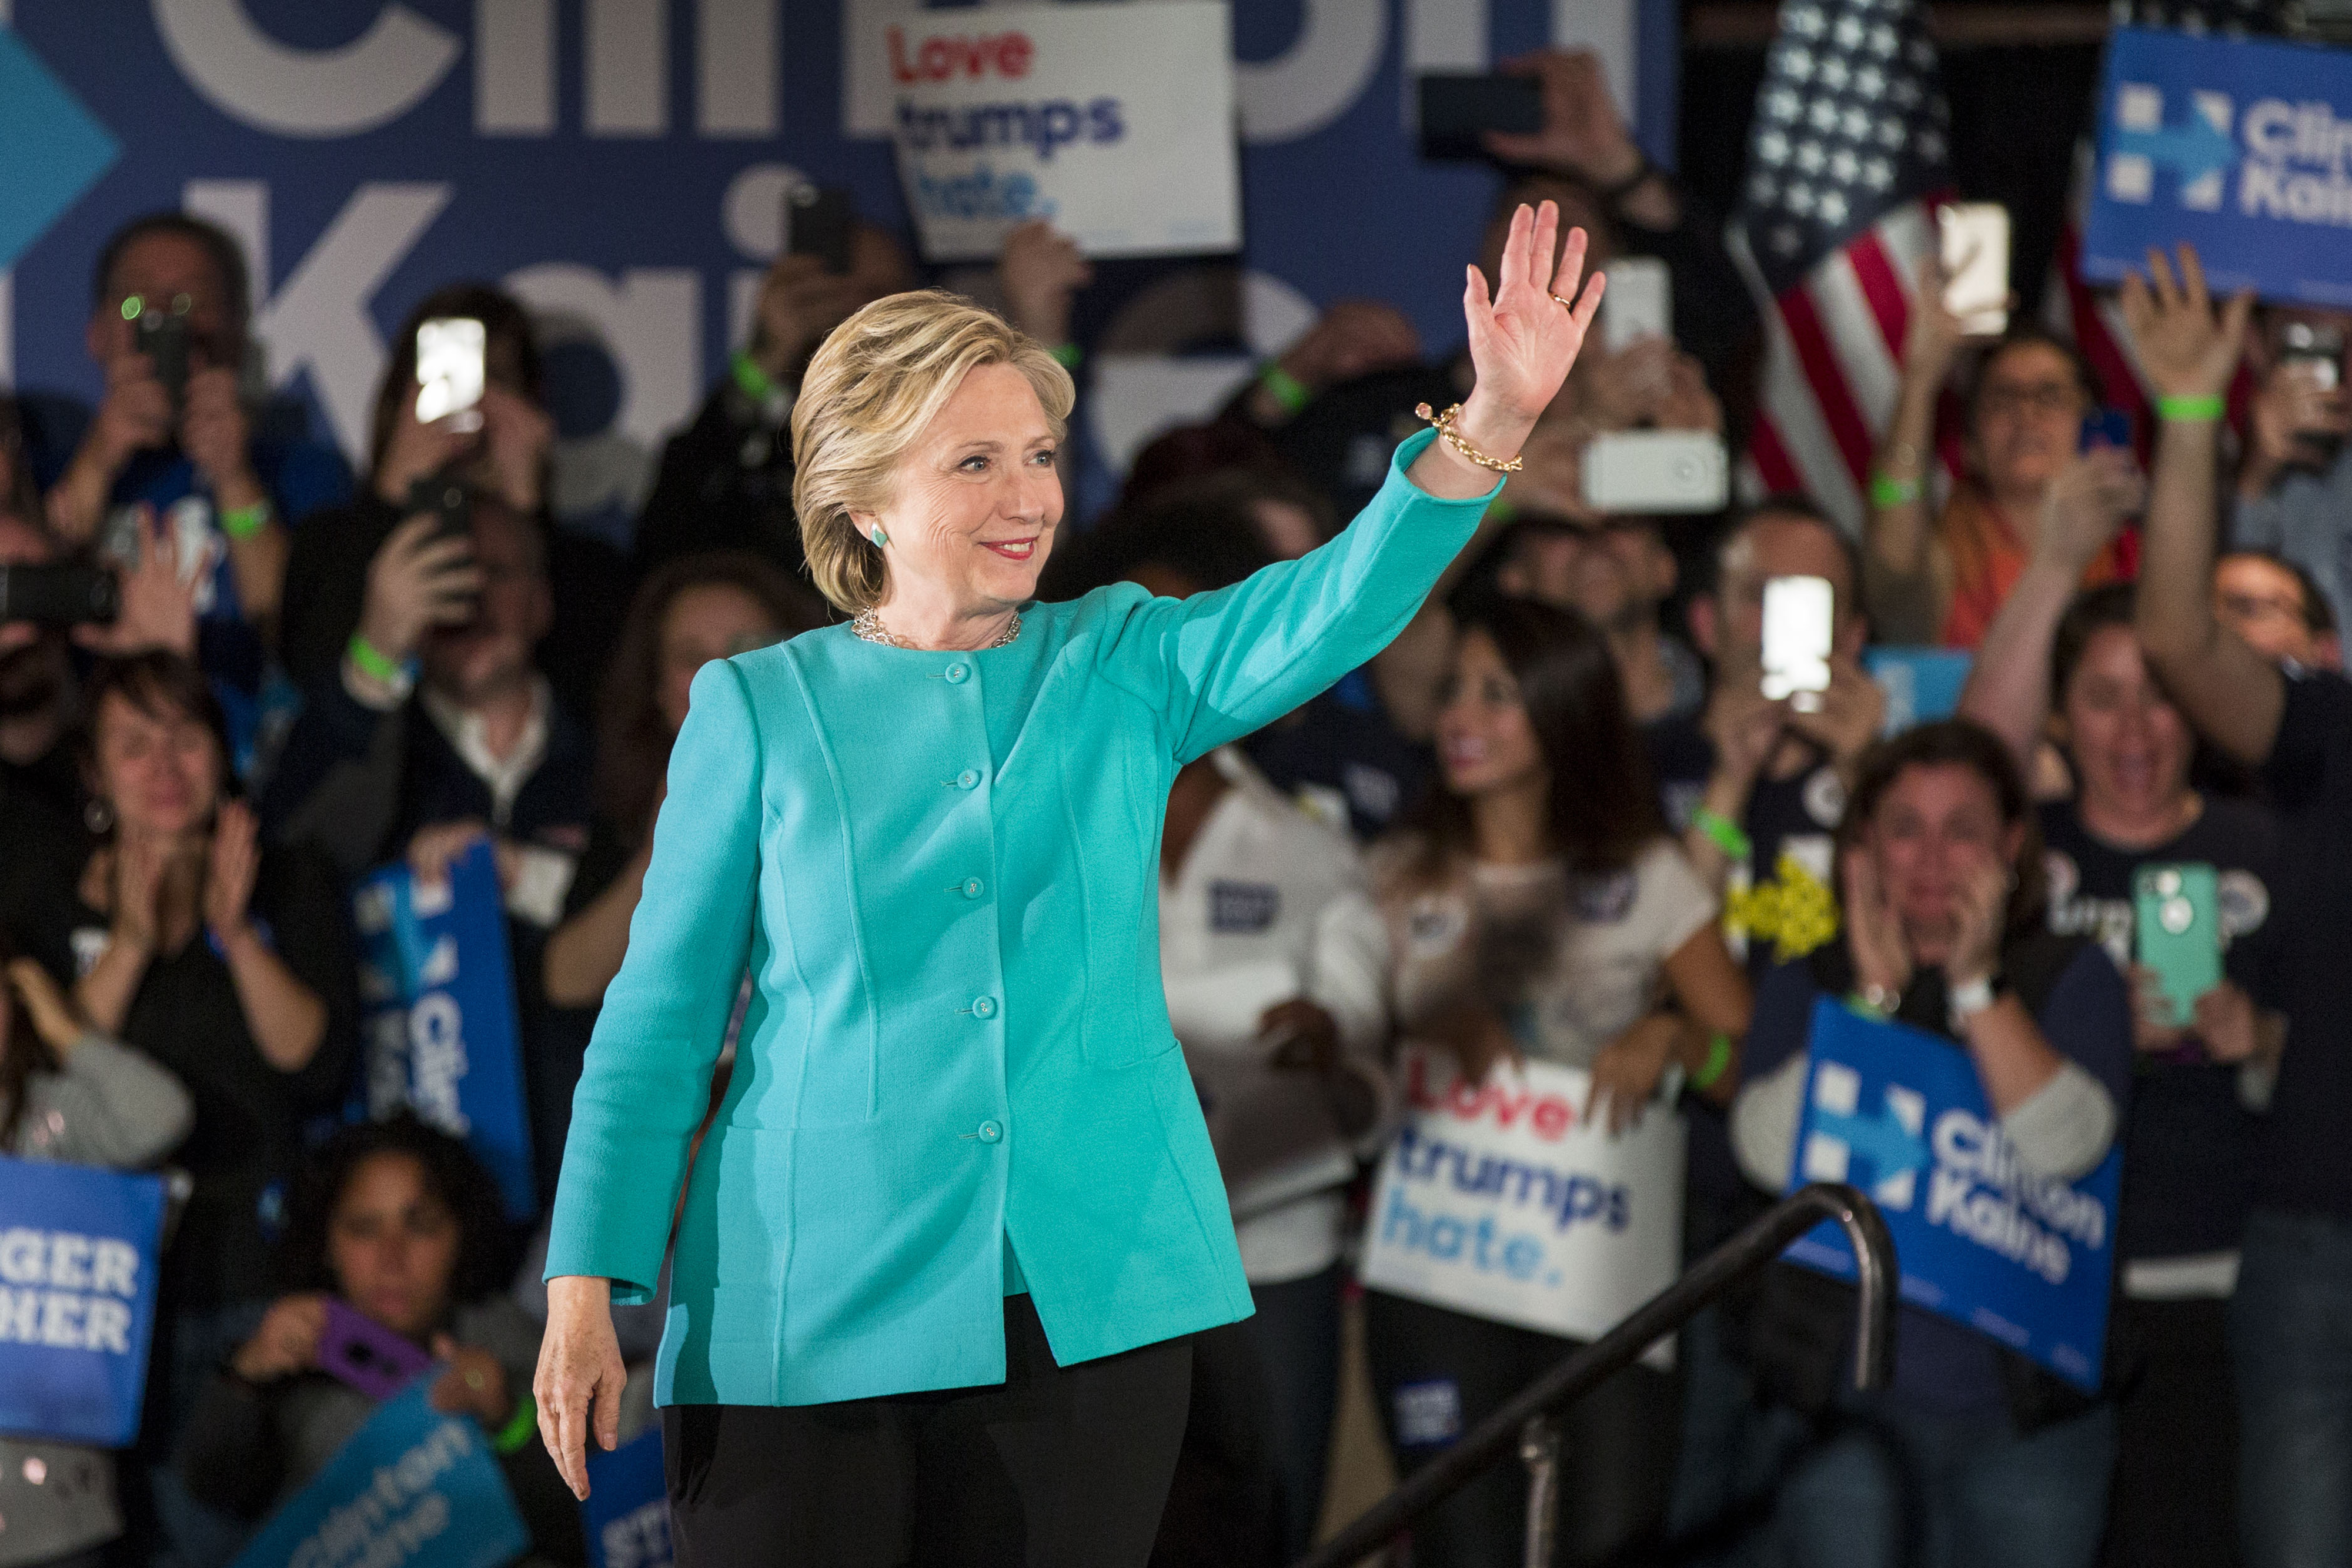 Hillary Clinton, 2016 Democratic presidential nominee, waves during a campaign rally in Manchester, New Hampshire, U.S., on Sunday, Nov. 6, 2016. (Scott Eisen—Bloomberg/Getty Images)